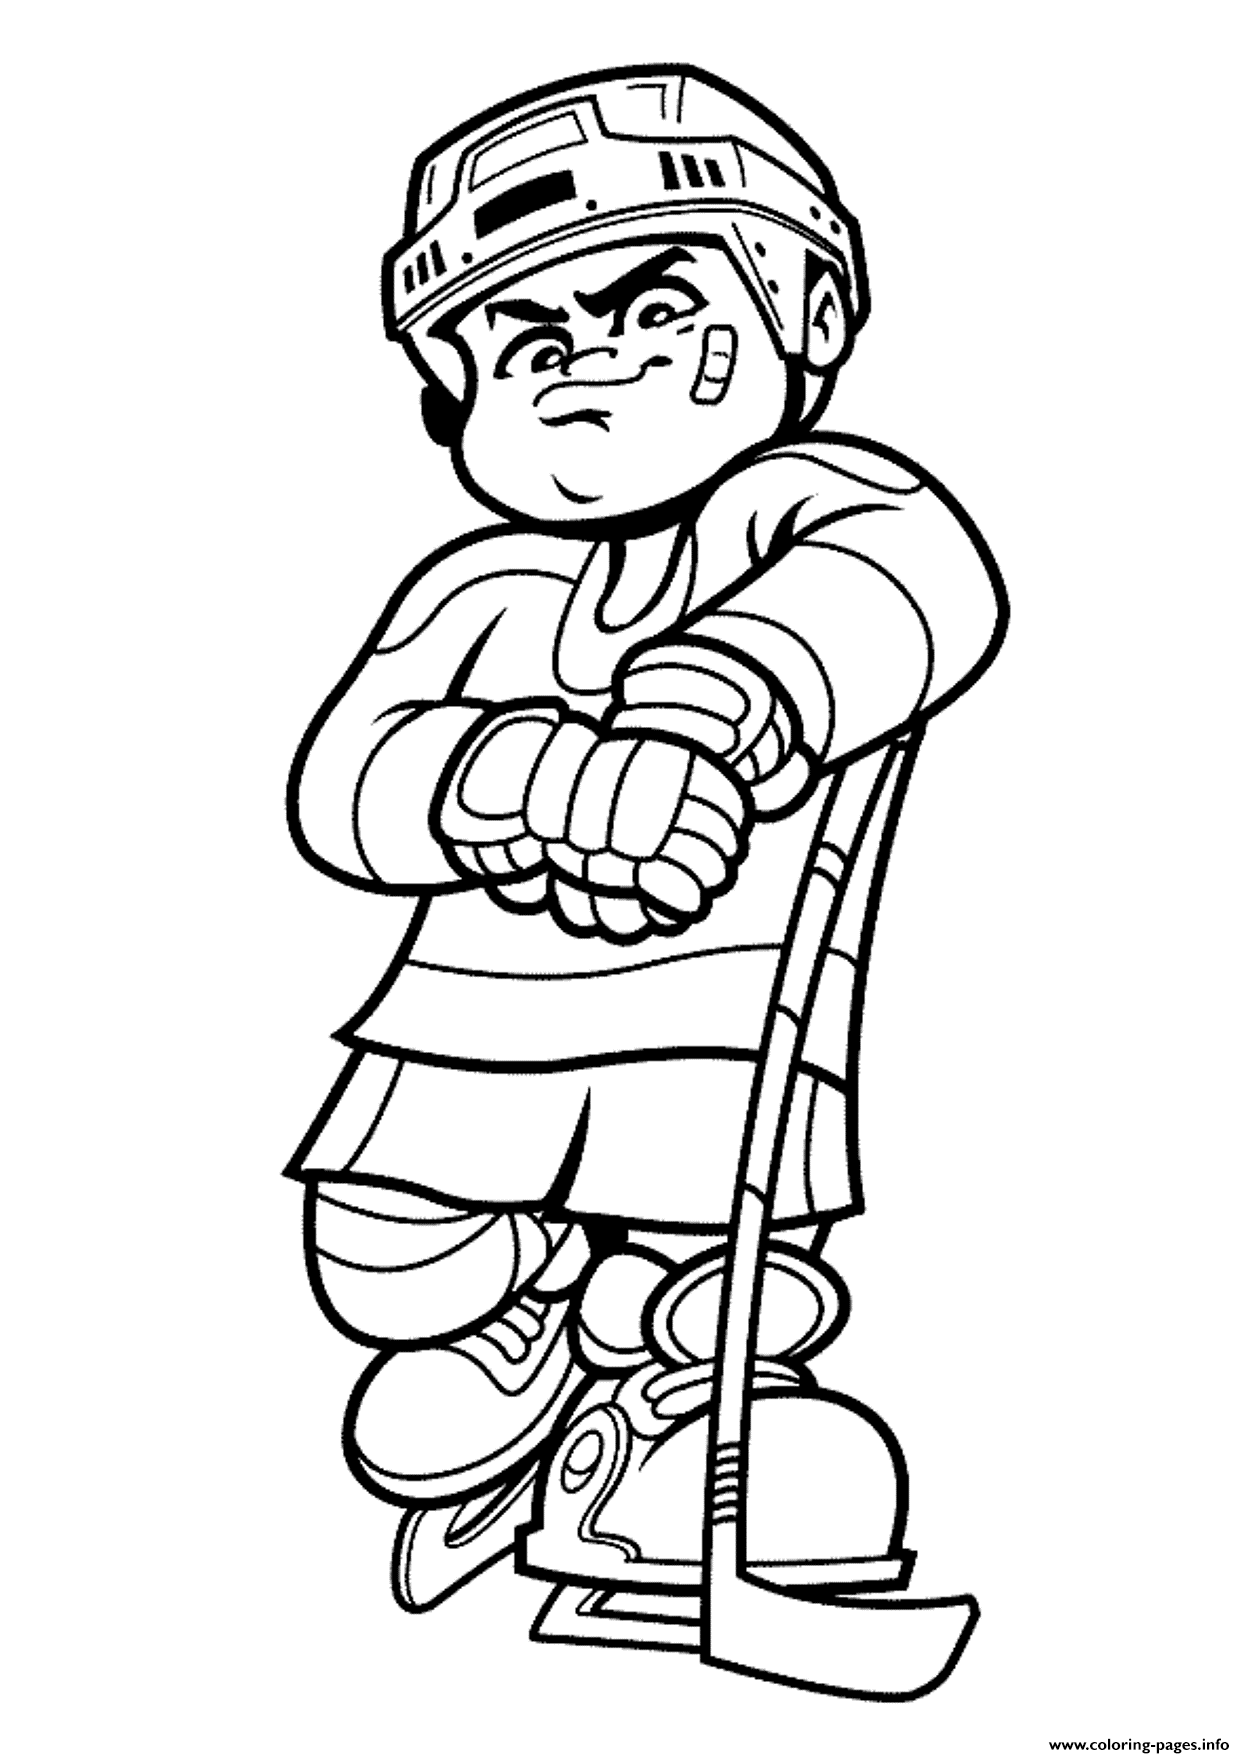 Hockey S Boy Player7811 coloring